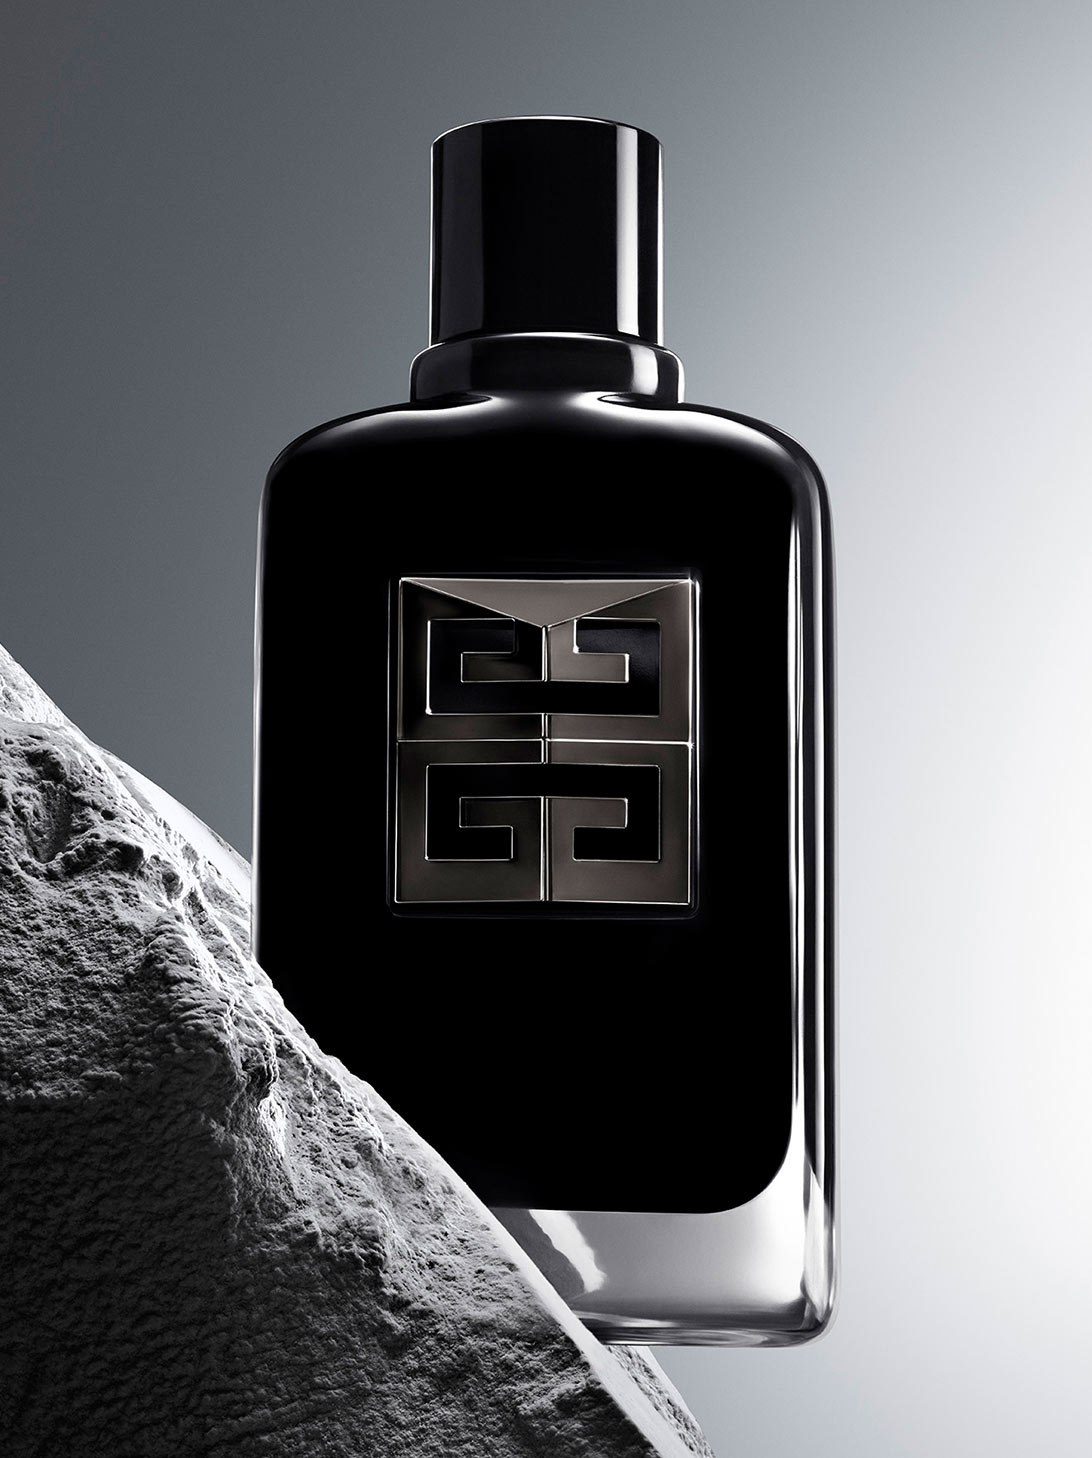 Givenchy gentleman society extreme